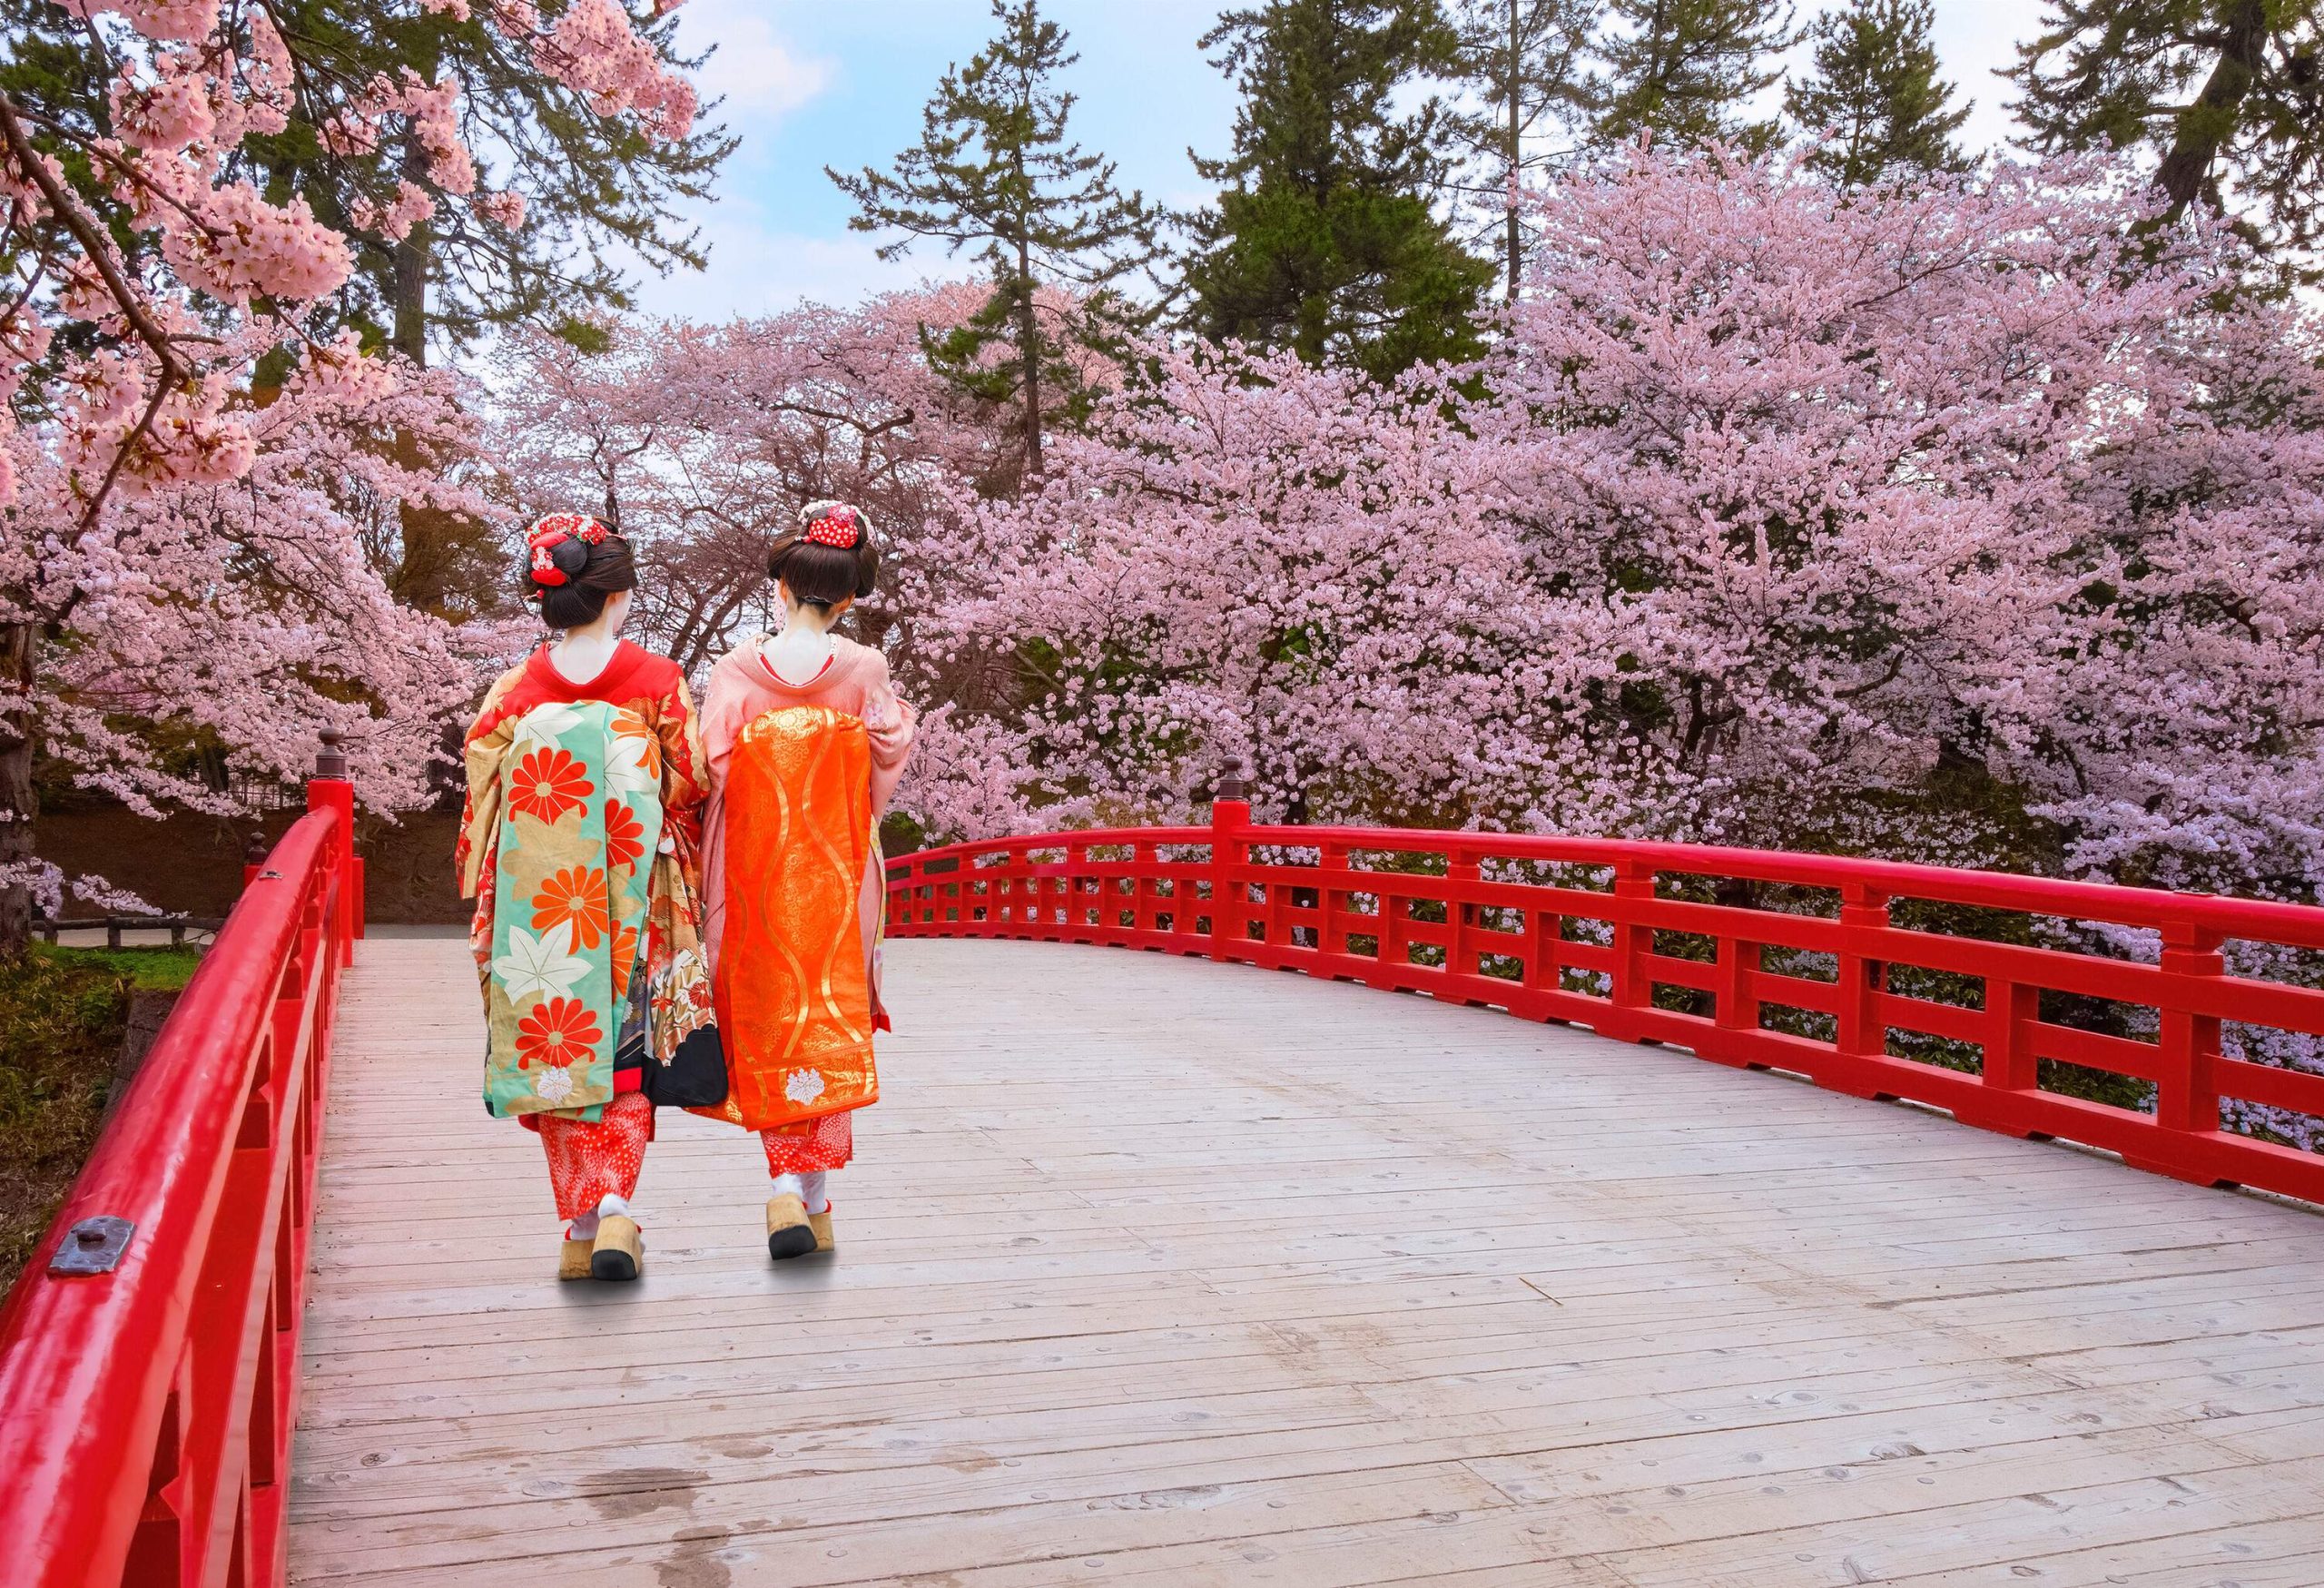 Two ladies wearing kimonos pass through a red-fenced bridge surrounded by beautiful cherry blossoms.